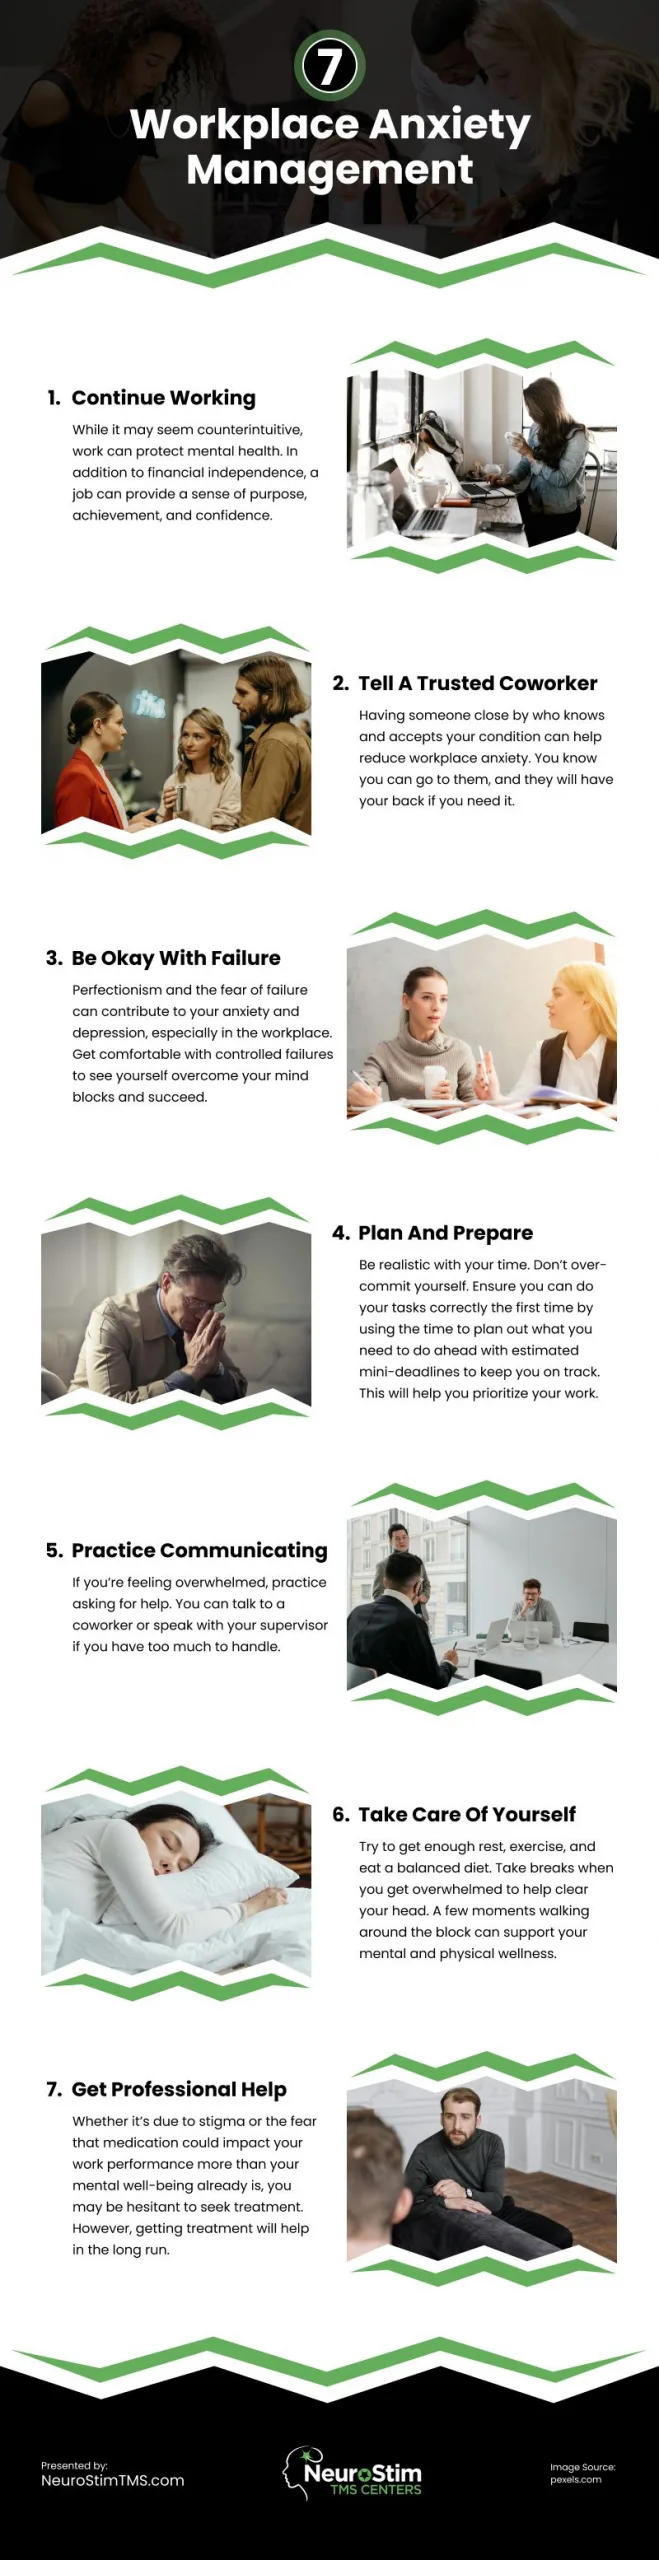 7 Workplace Anxiety Management Infographic